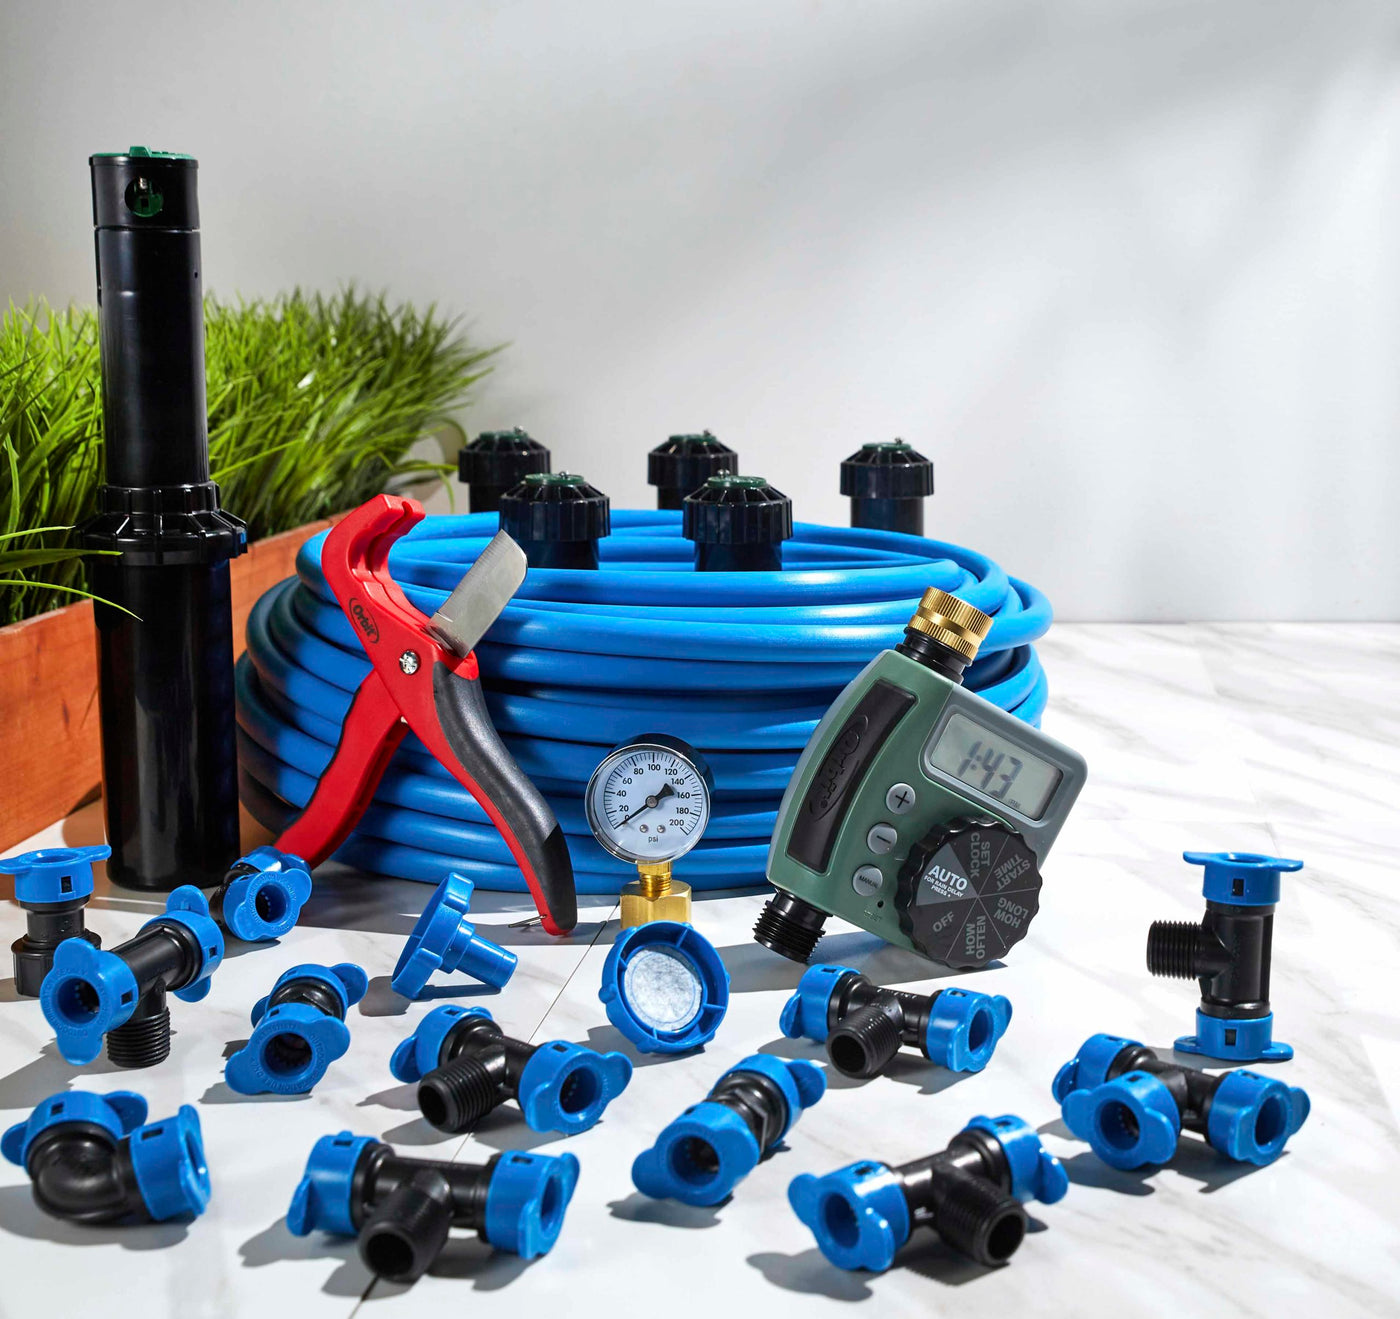 50020 - This all-inclusive sprinkler system connects to a hose and is meant to be buried. Seamlessly schedule waterings and cover 1,000 square feet of lawn. The Orbit sprinkler kit features Blu-lock pipe and fittings (no glue required) 6 fully adjustable gear drive sprinklers and a digital timer. 